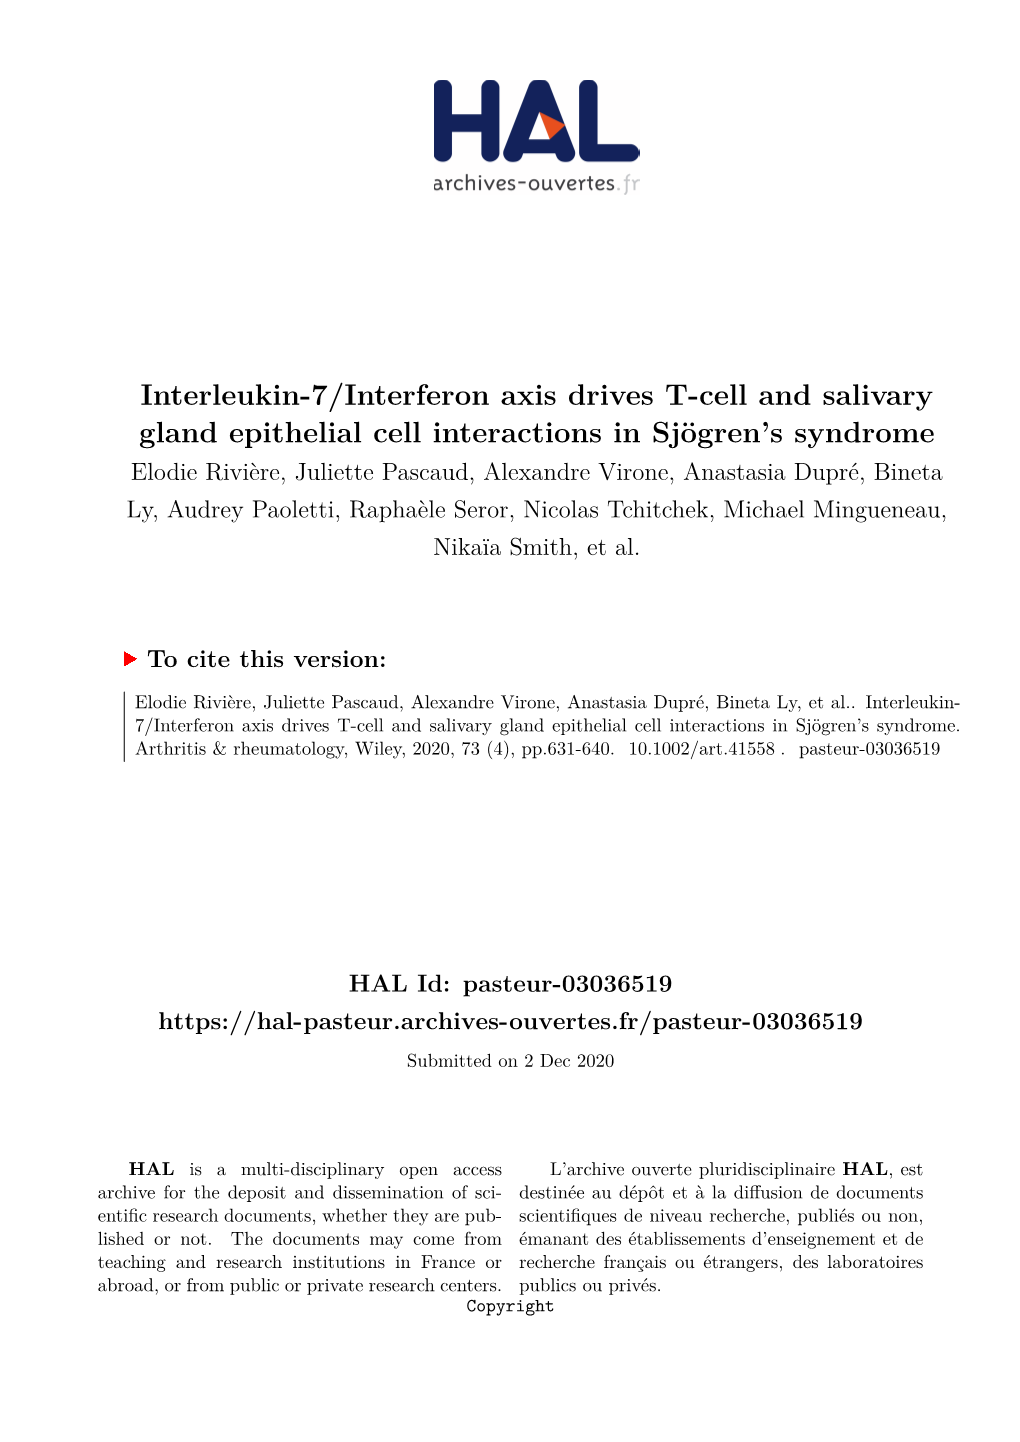 Interleukin-7/Interferon Axis Drives T-Cell and Salivary Gland Epithelial